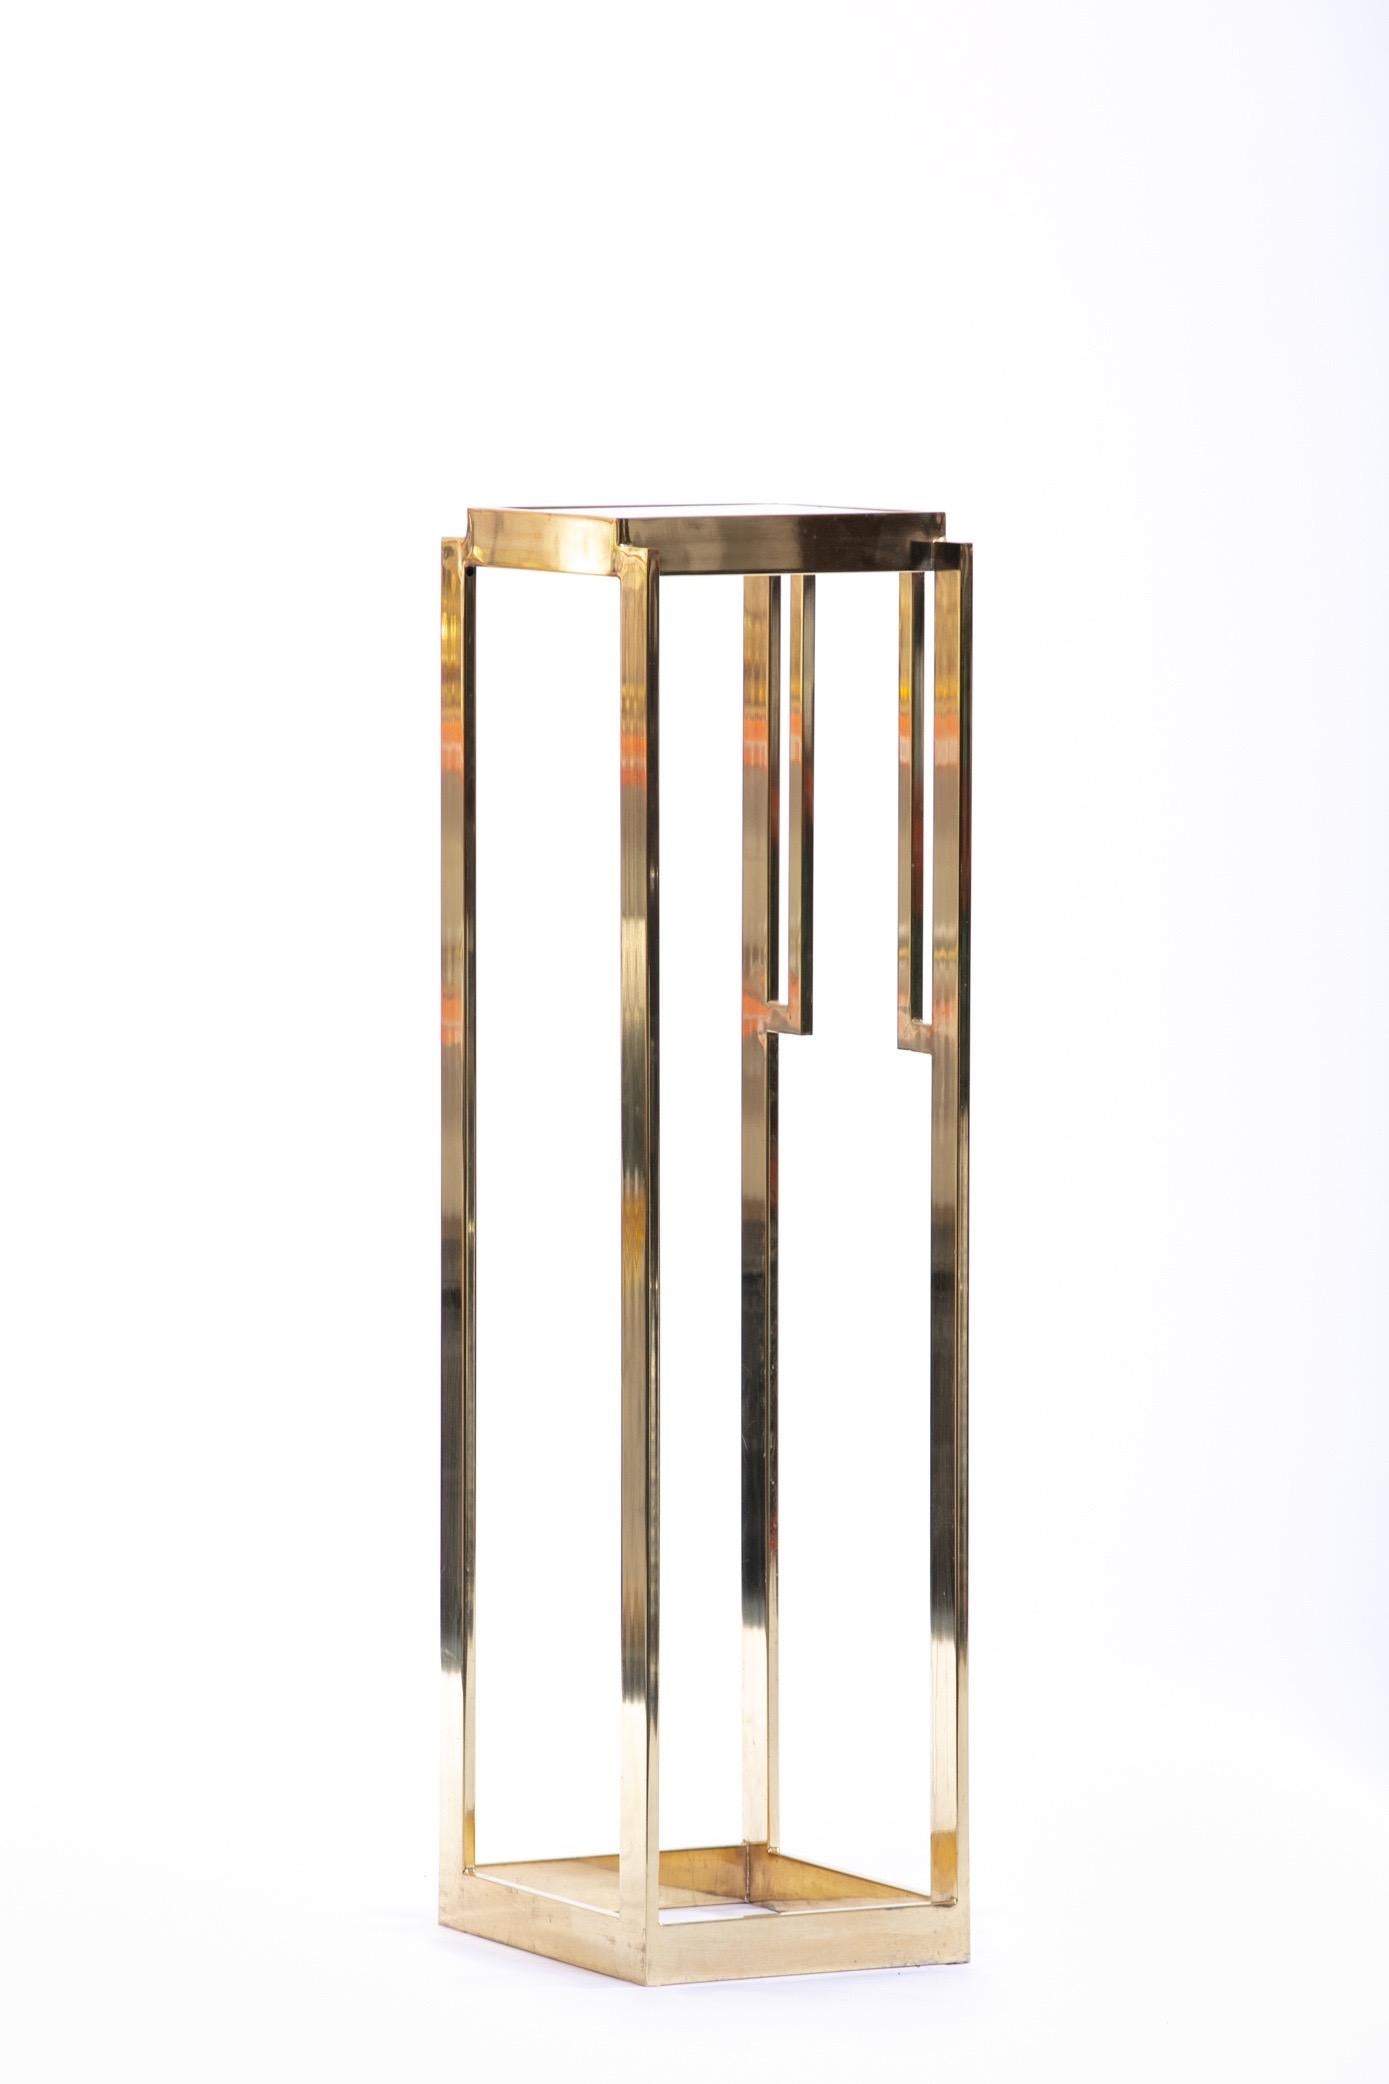 Blown Glass Guy Lefevre Style Tall Brass Midcentury Pedestals with Interchangeable Glass